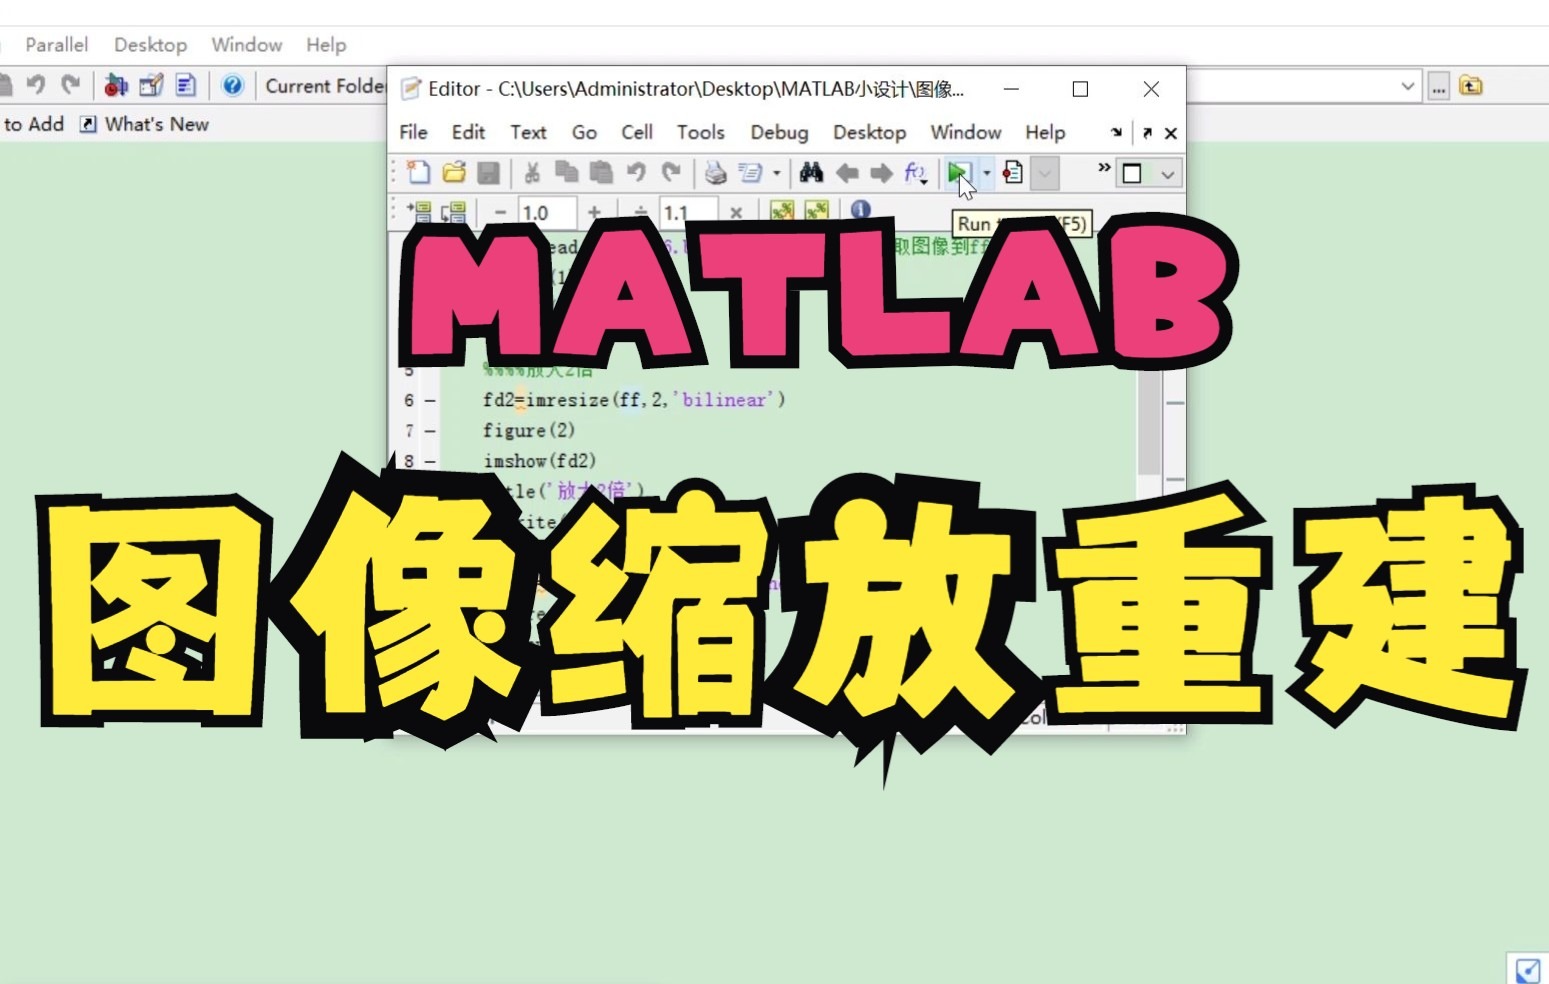 MATLAB 2019 Free Download - Get Into Pc